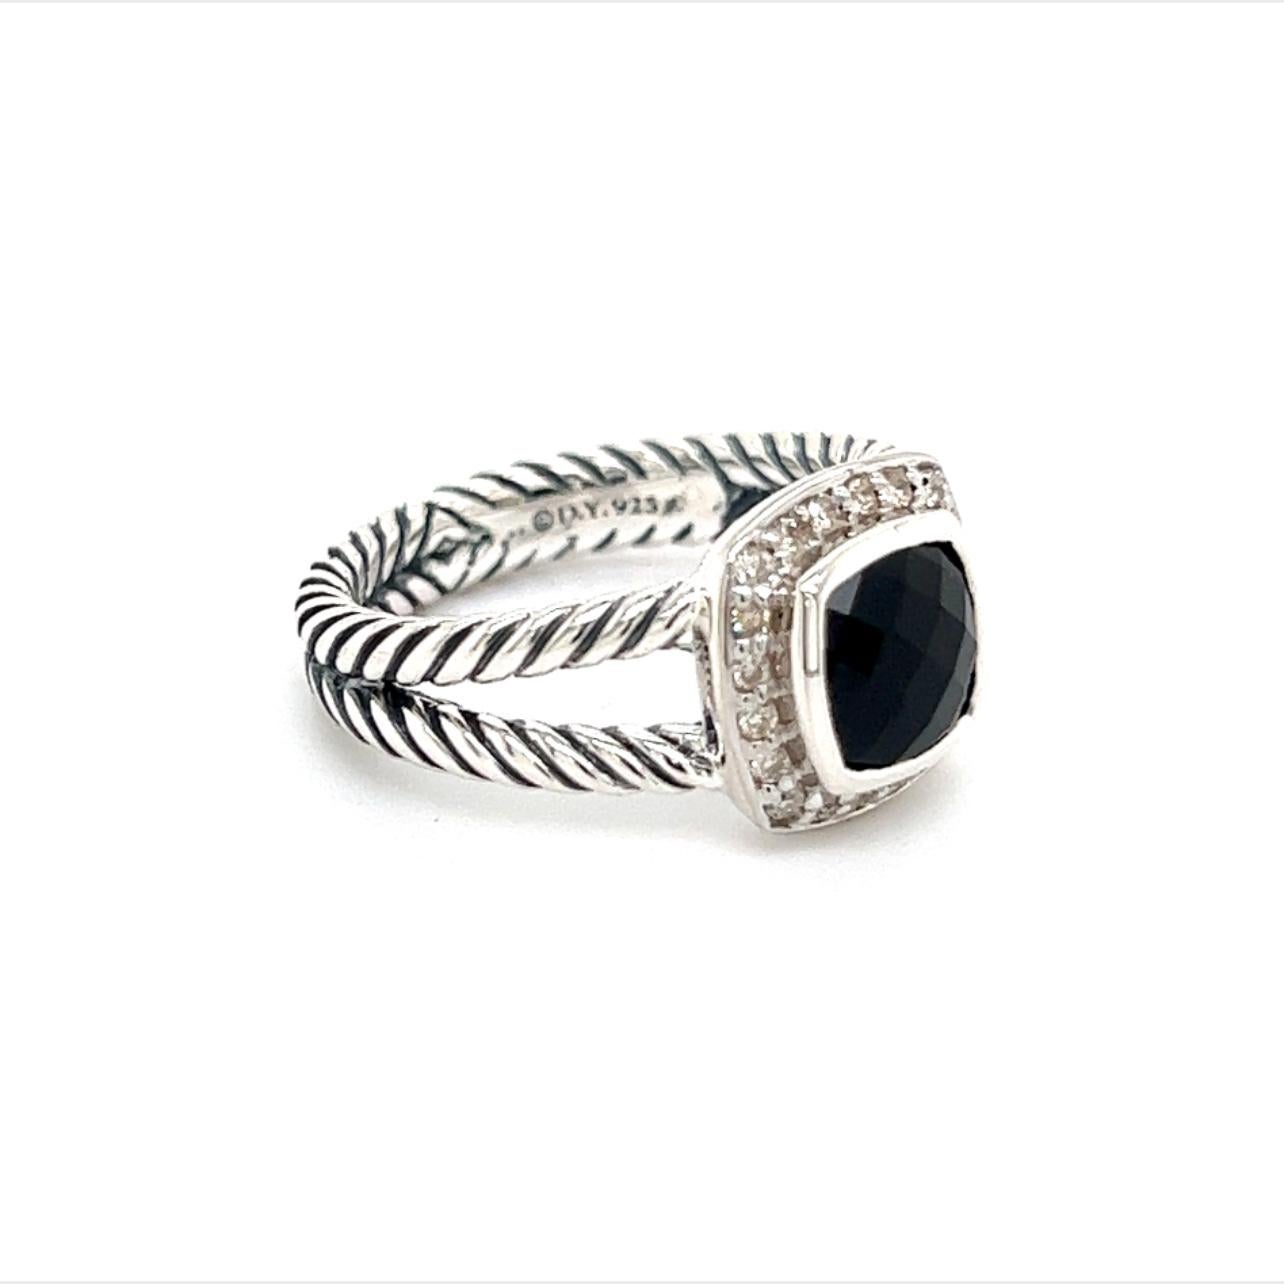 David Yurman Estate Diamond Onyx Ring Silver 1.67 TCW Size 6.5 DY70

Ring from ALBION COLLECTION

This elegant Authentic David Yurman ring is made of sterling silver and has a weight of 5.43 grams.

TRUSTED SELLER SINCE 2002

PLEASE SEE OUR HUNDREDS